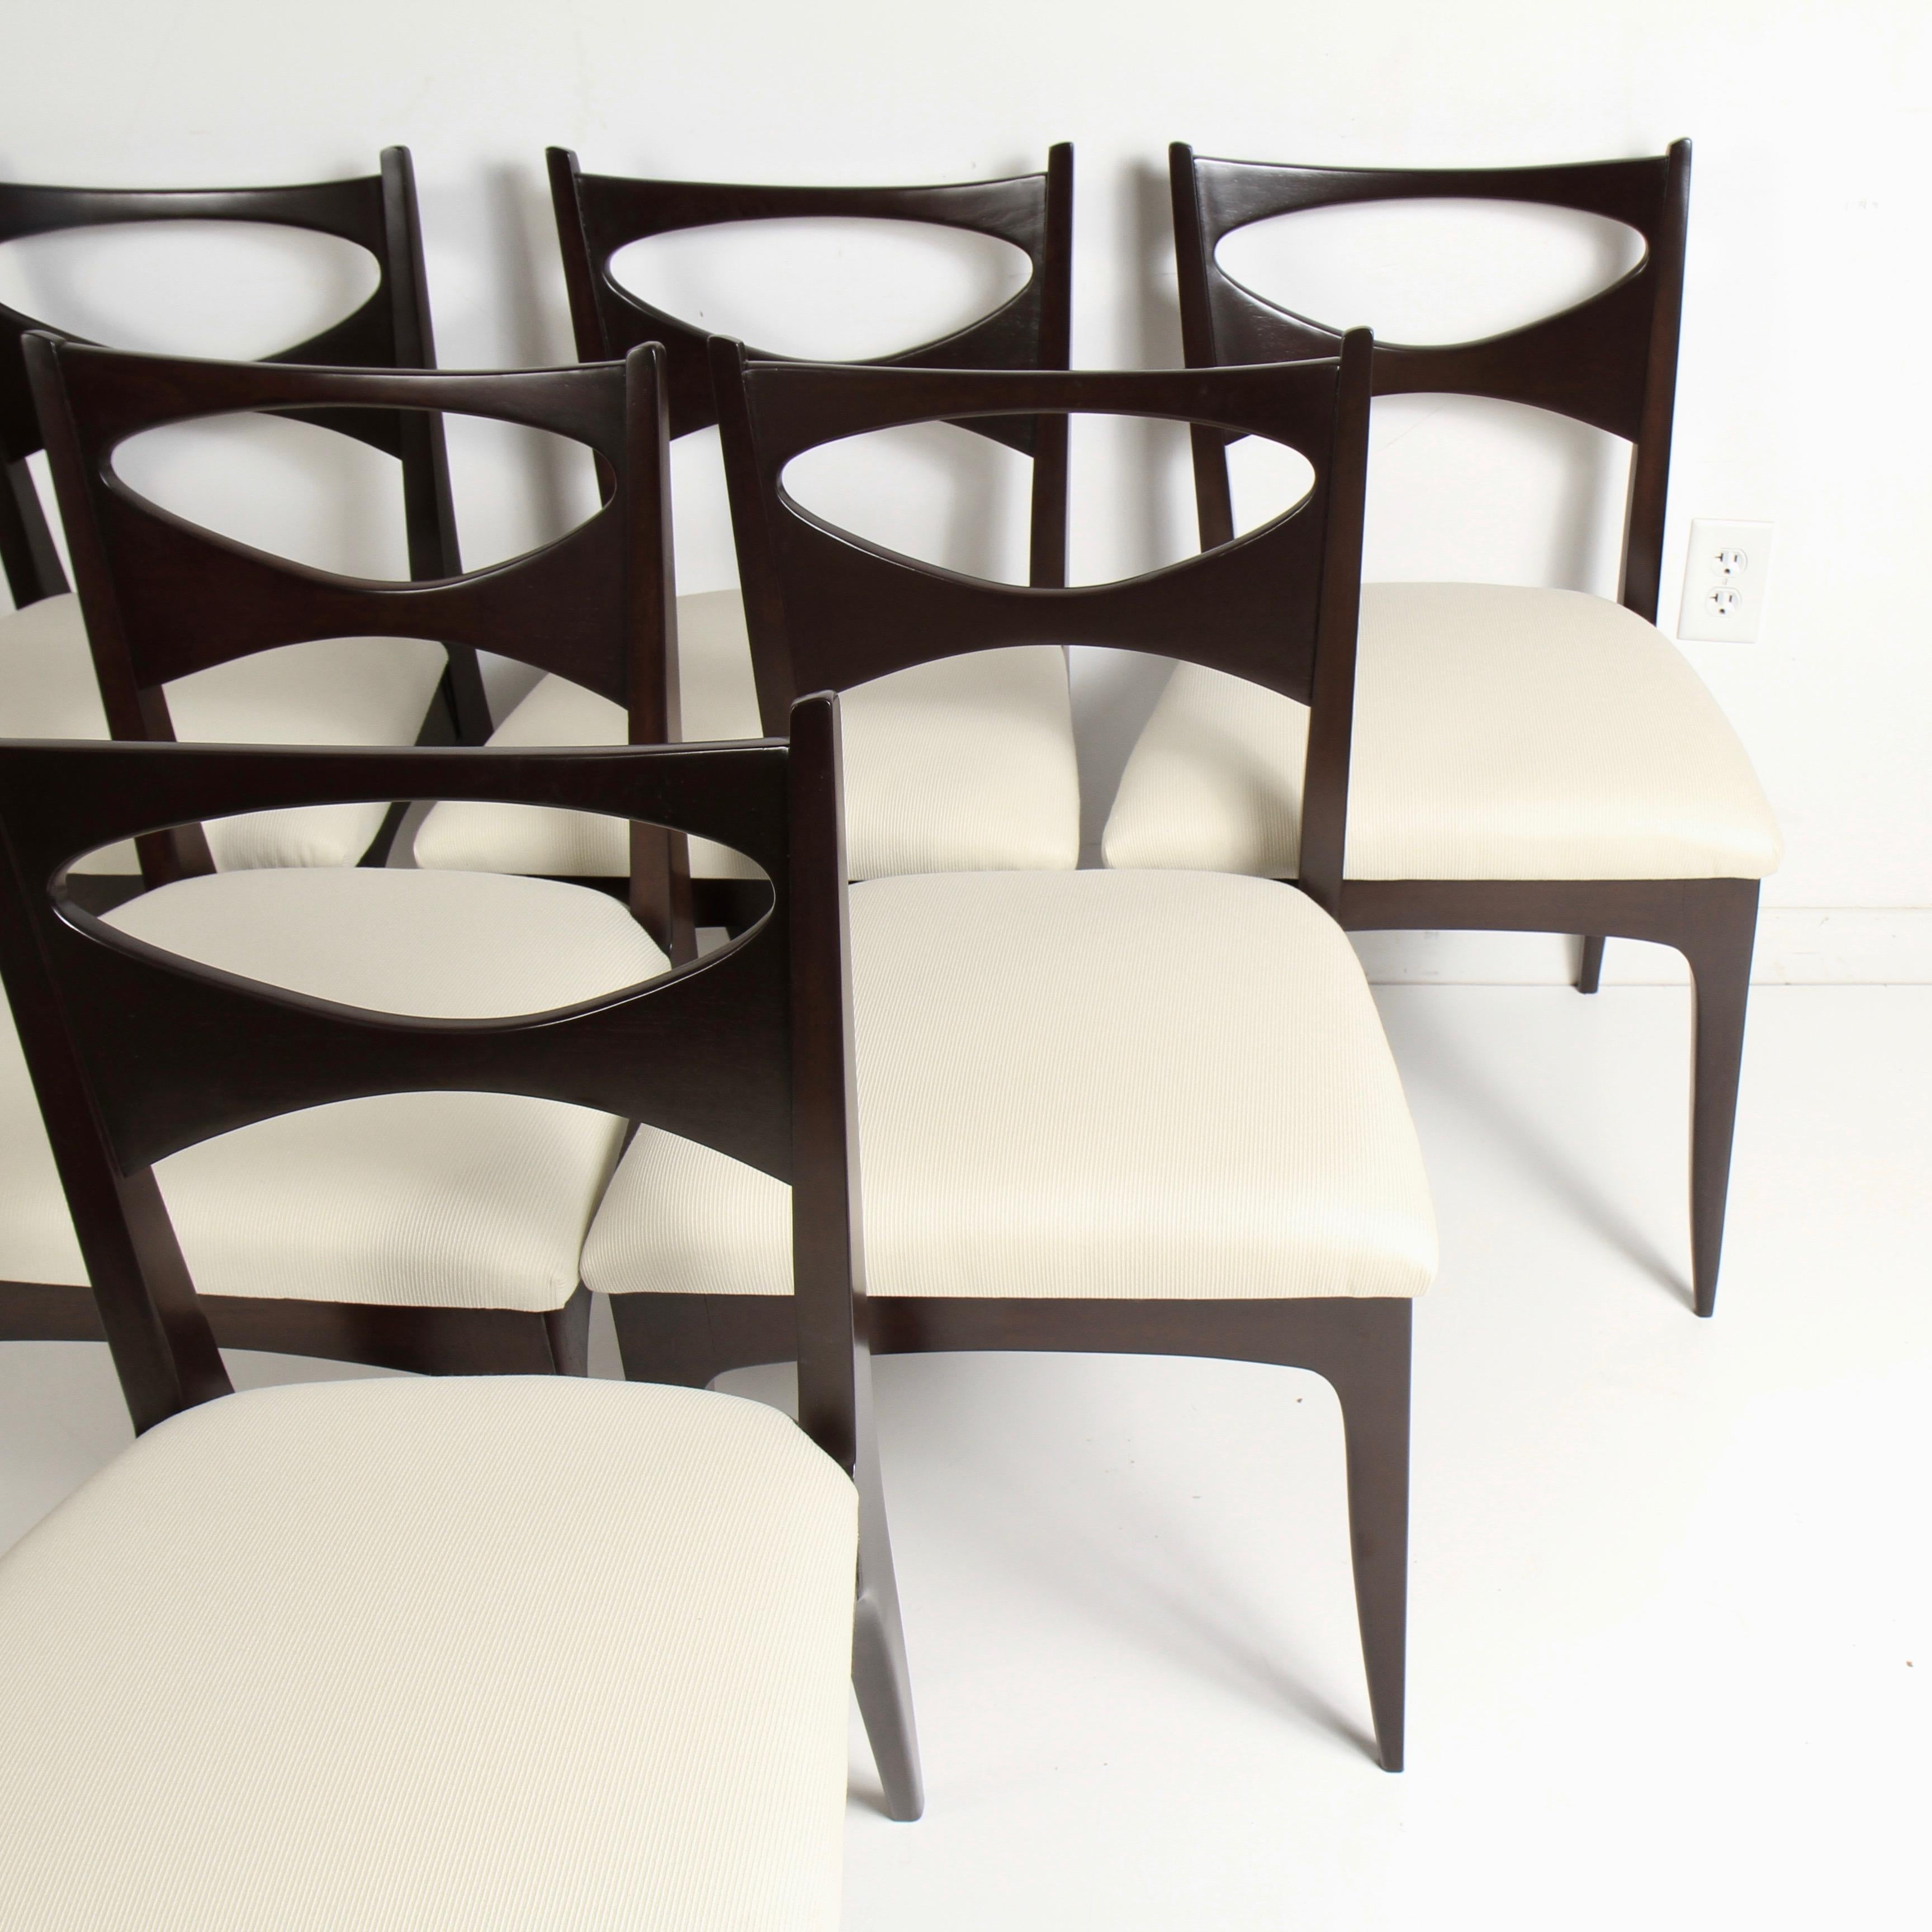 Set of six restored midcentury walnut Drexel Profile K62 dining chairs by John Van Koert. The Drexel Profile furniture collection was in production from 1955 to 1961. Van Koert started out as a jewelry designer for Harry Winston after WWII and later